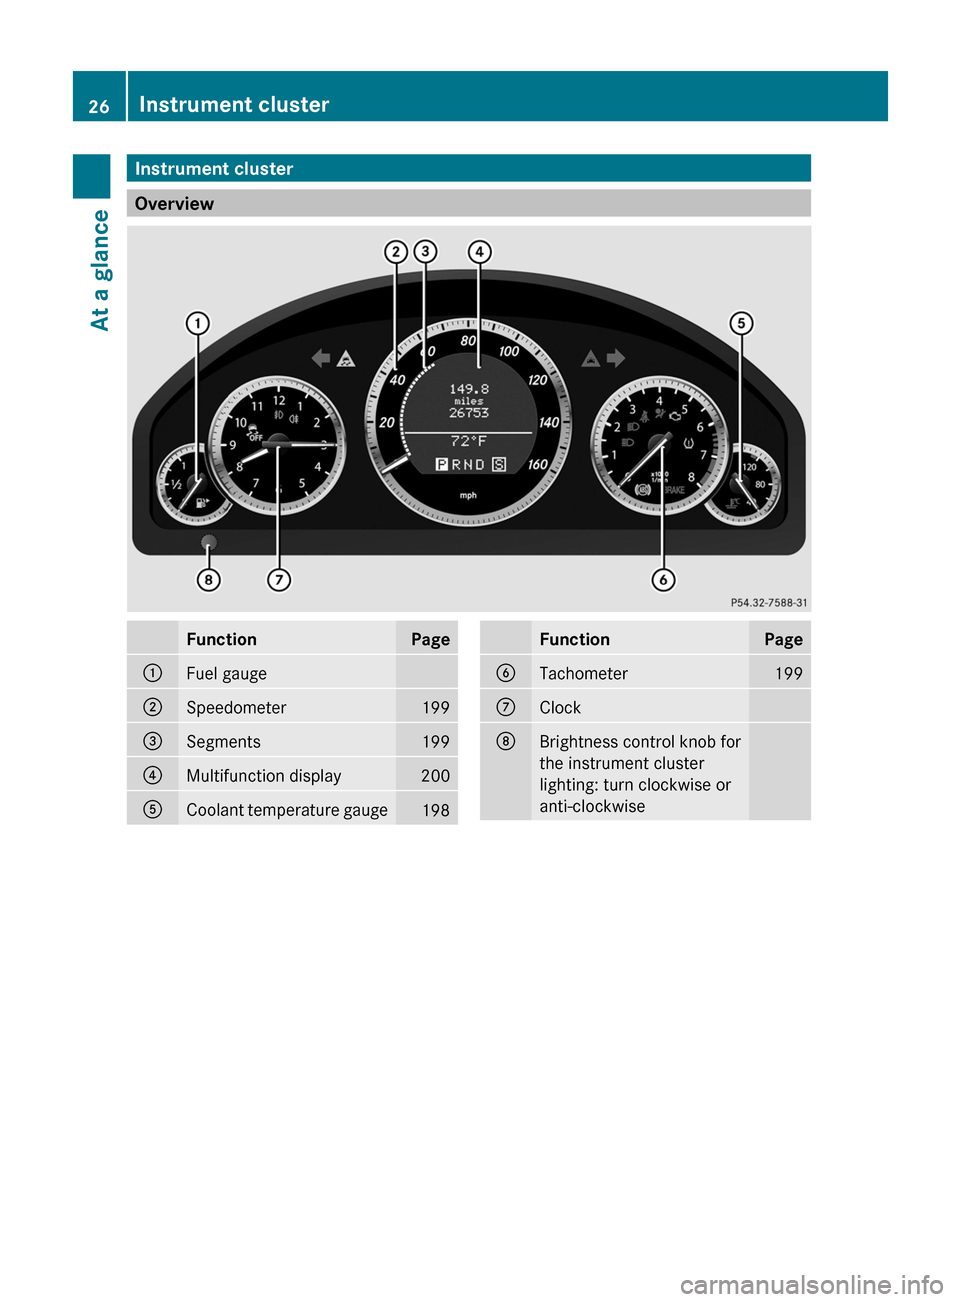 MERCEDES-BENZ E-Class COUPE 2011 C207 Owners Guide Instrument cluster
Overview
FunctionPage:Fuel gauge;Speedometer199=Segments199?Multifunction display200ACoolant temperature gauge198FunctionPageBTachometer199CClockDBrightness control knob for
the ins